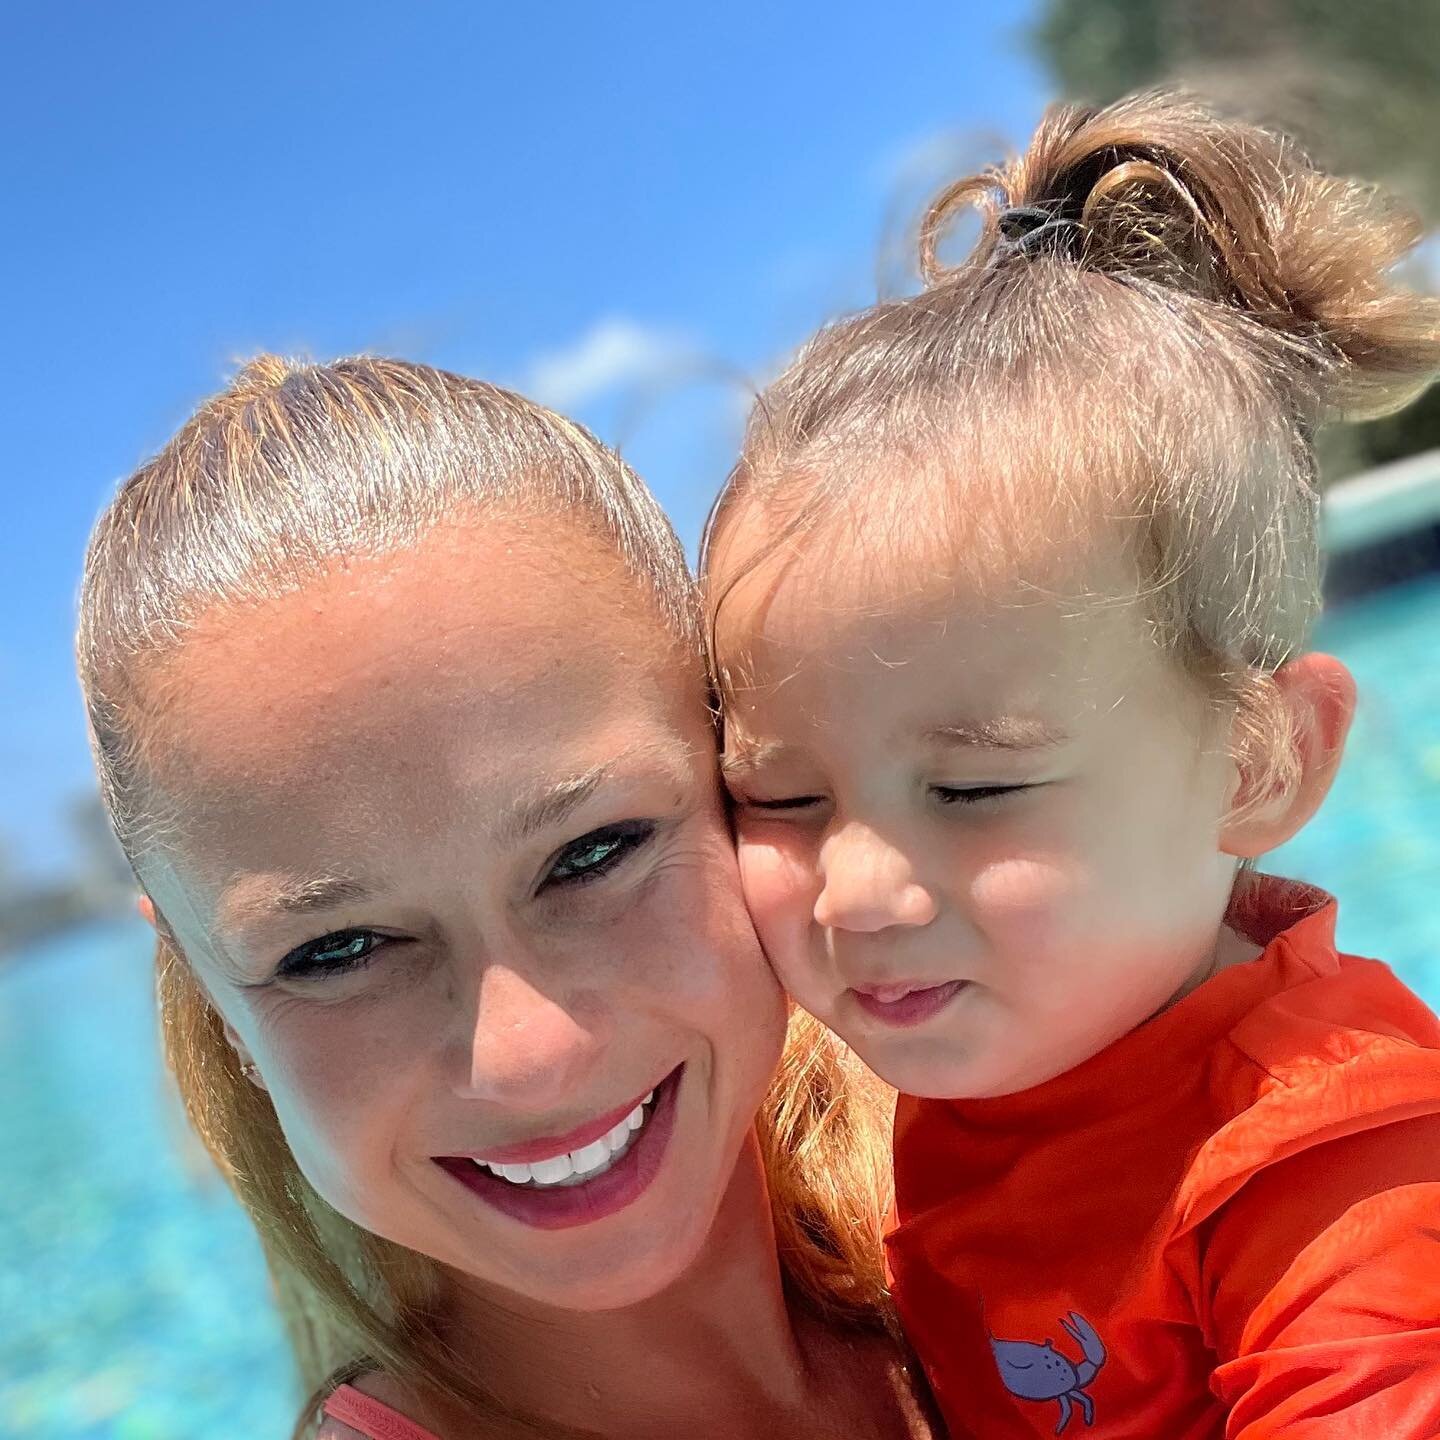 Do what you love and you&rsquo;ll never work a day in your life! 🧜🏼&zwj;♀️💓👶🏻
.
.
.
.
#swimhaven #instructors #americanredcross #teacher #florida #soflo #miami #miamibeach #pool #poolparty #swimlesson #babyswimming #drowningprevention #susanfore